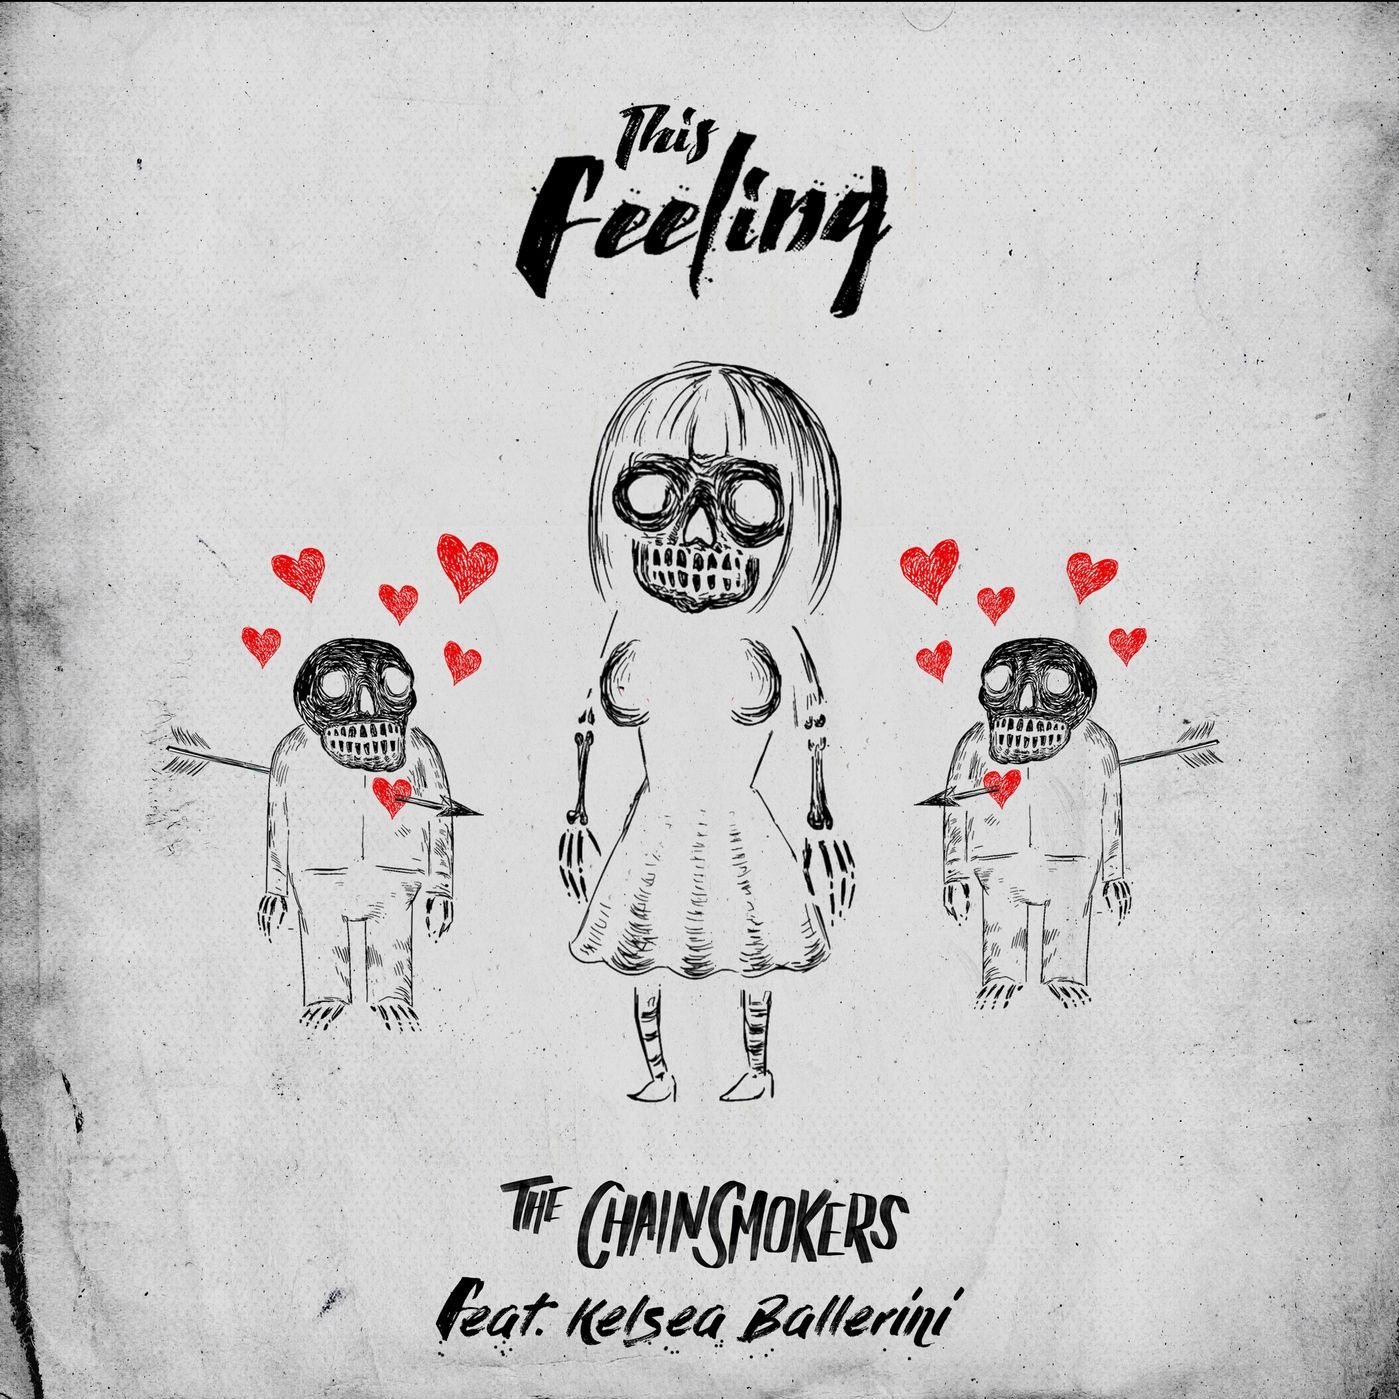 Chainsmokers Sick Boy This Feeling , HD Wallpaper & Backgrounds